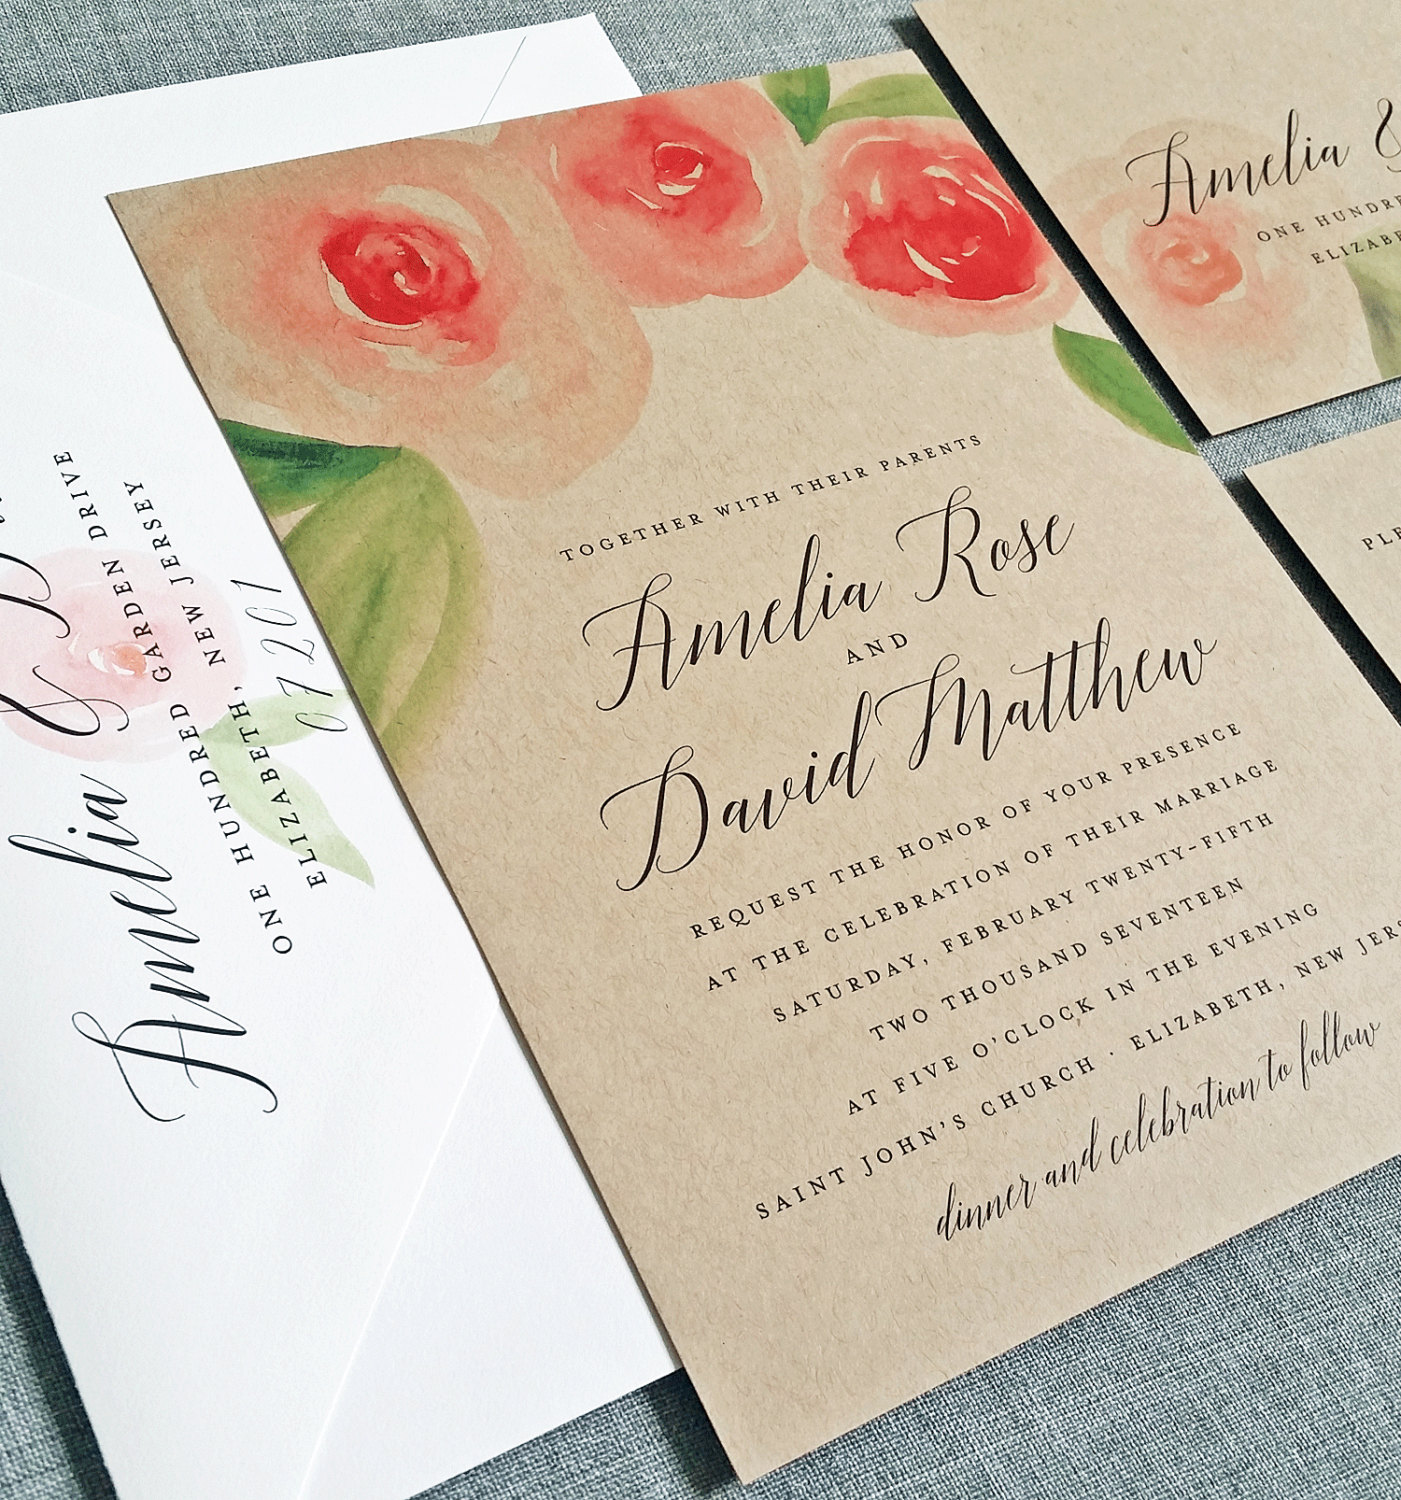 Kraft Paper Invitations for Weddings | by Cricket Printing